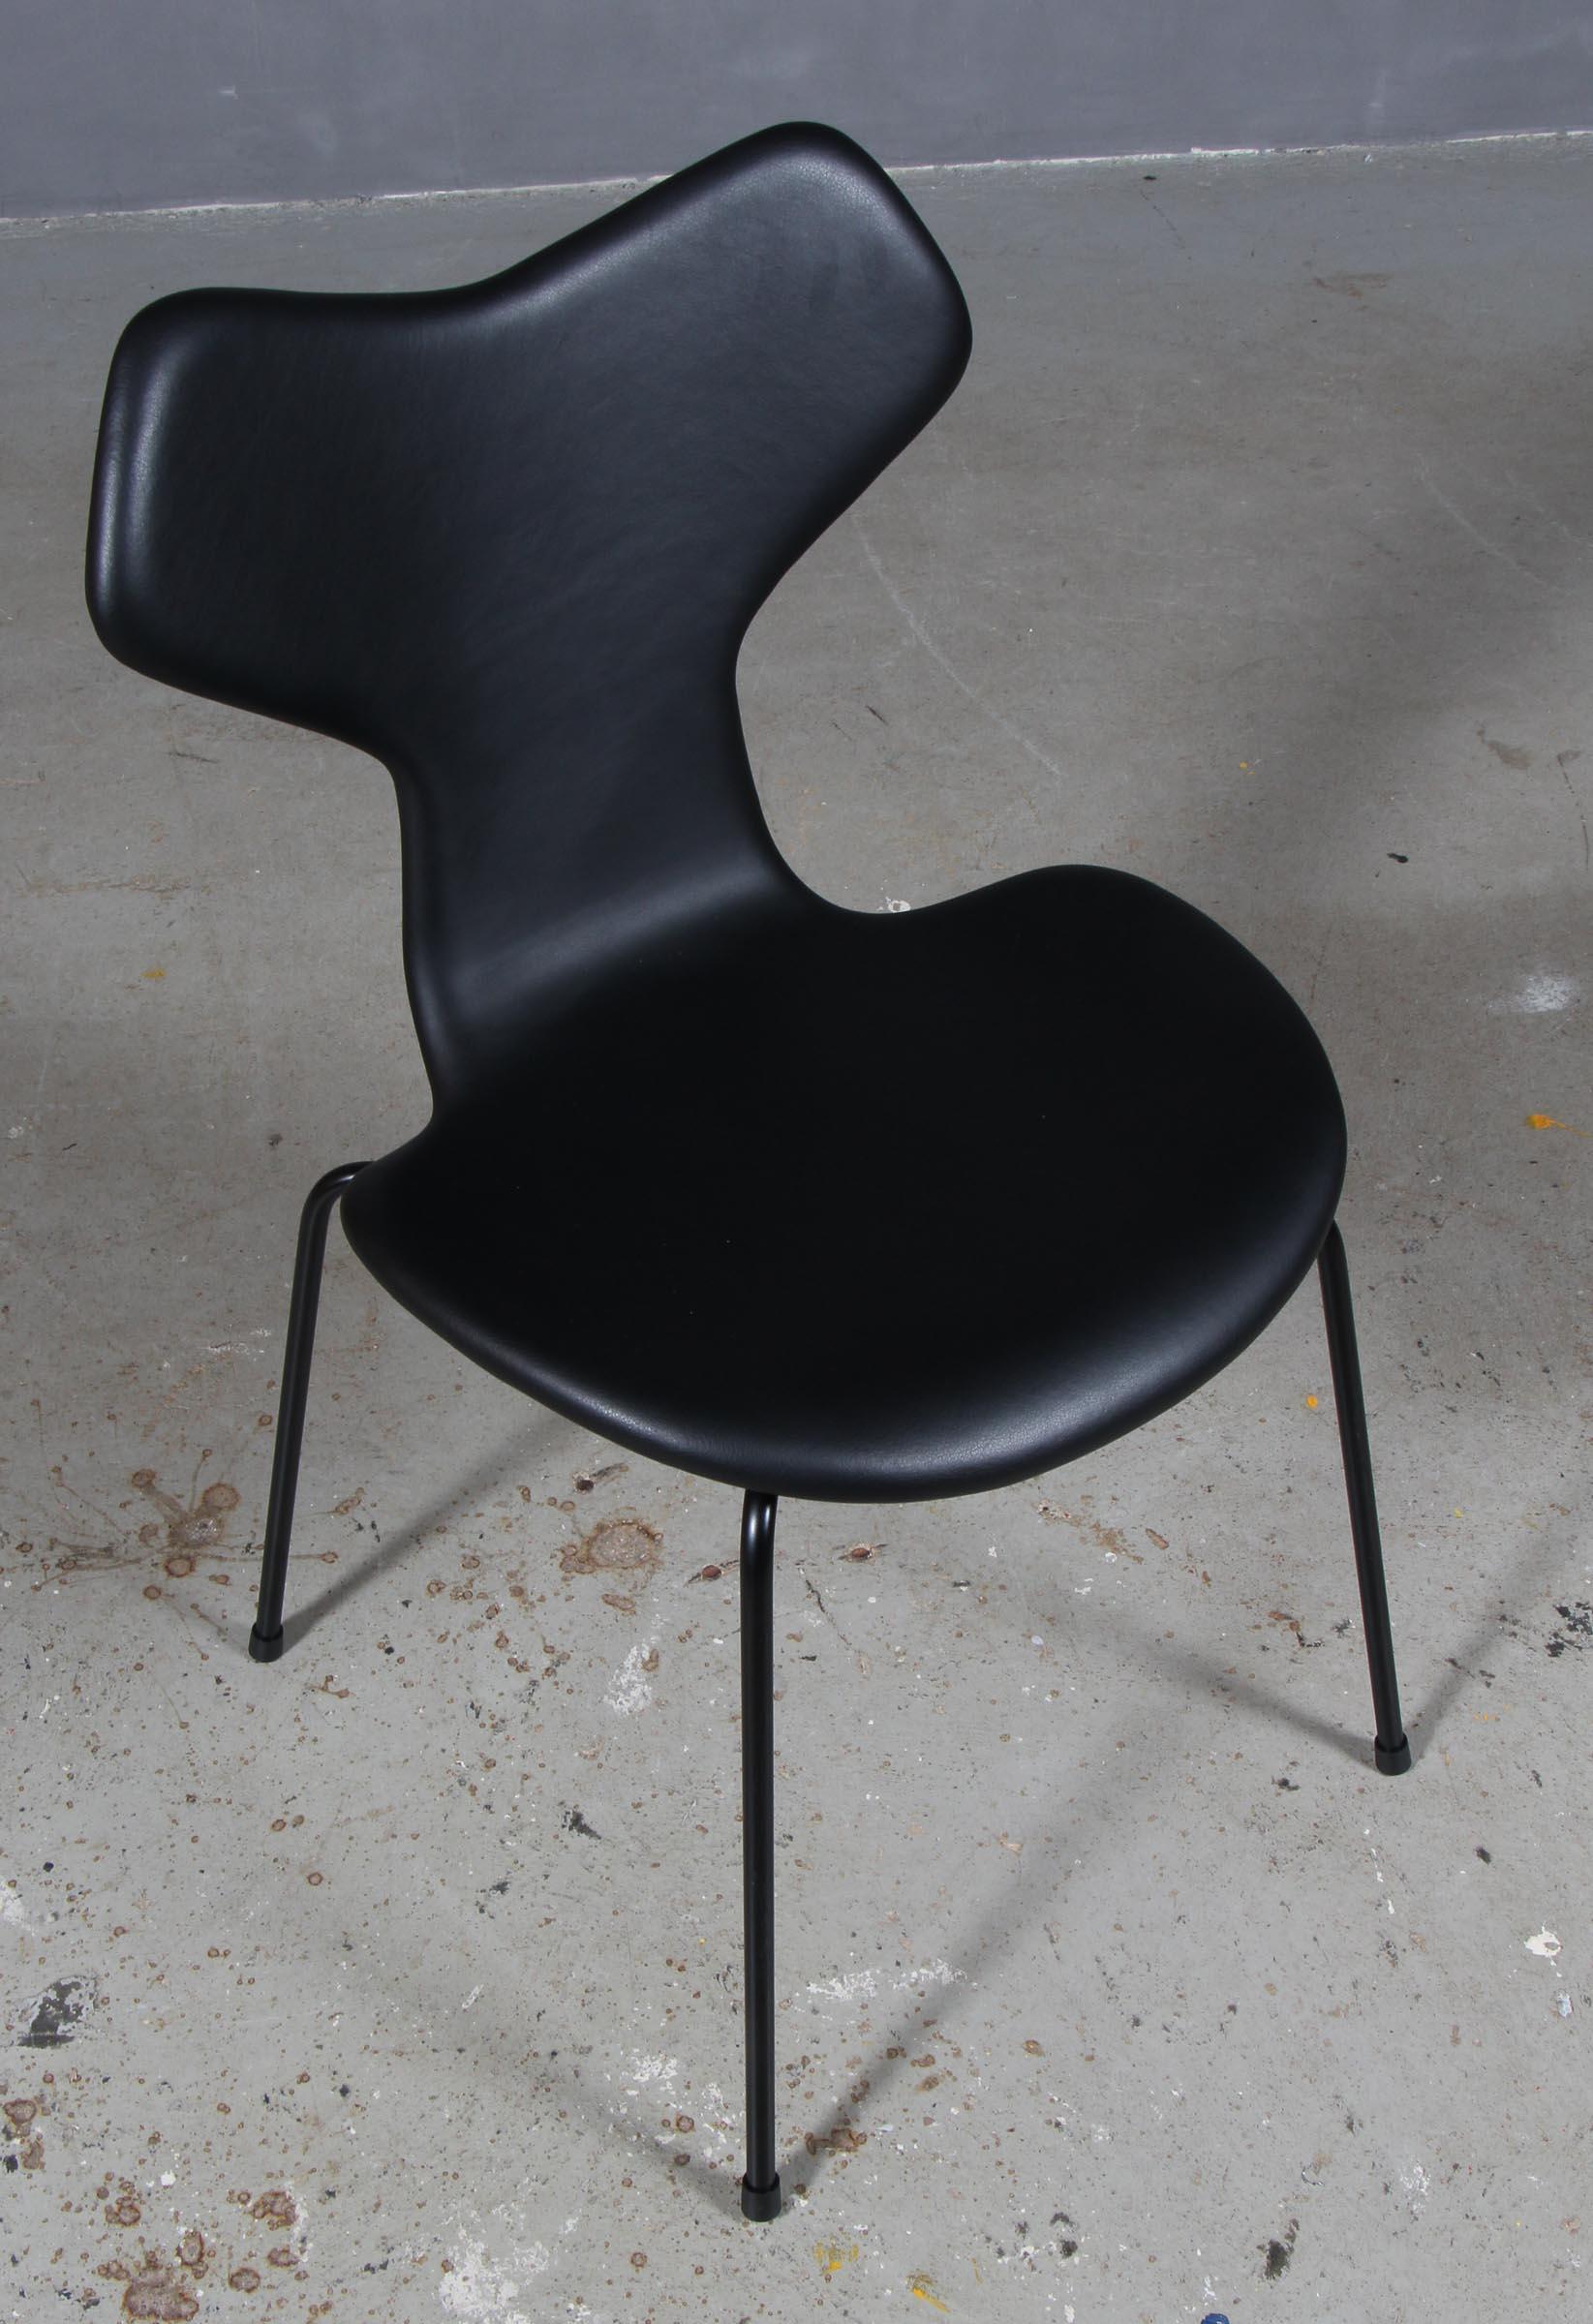 Arne Jacobsen dining chair new upholstered with black aniline leather.

Base of powder coated steel tube.

Model 3130 Grand Prix, made by Fritz Hansen.